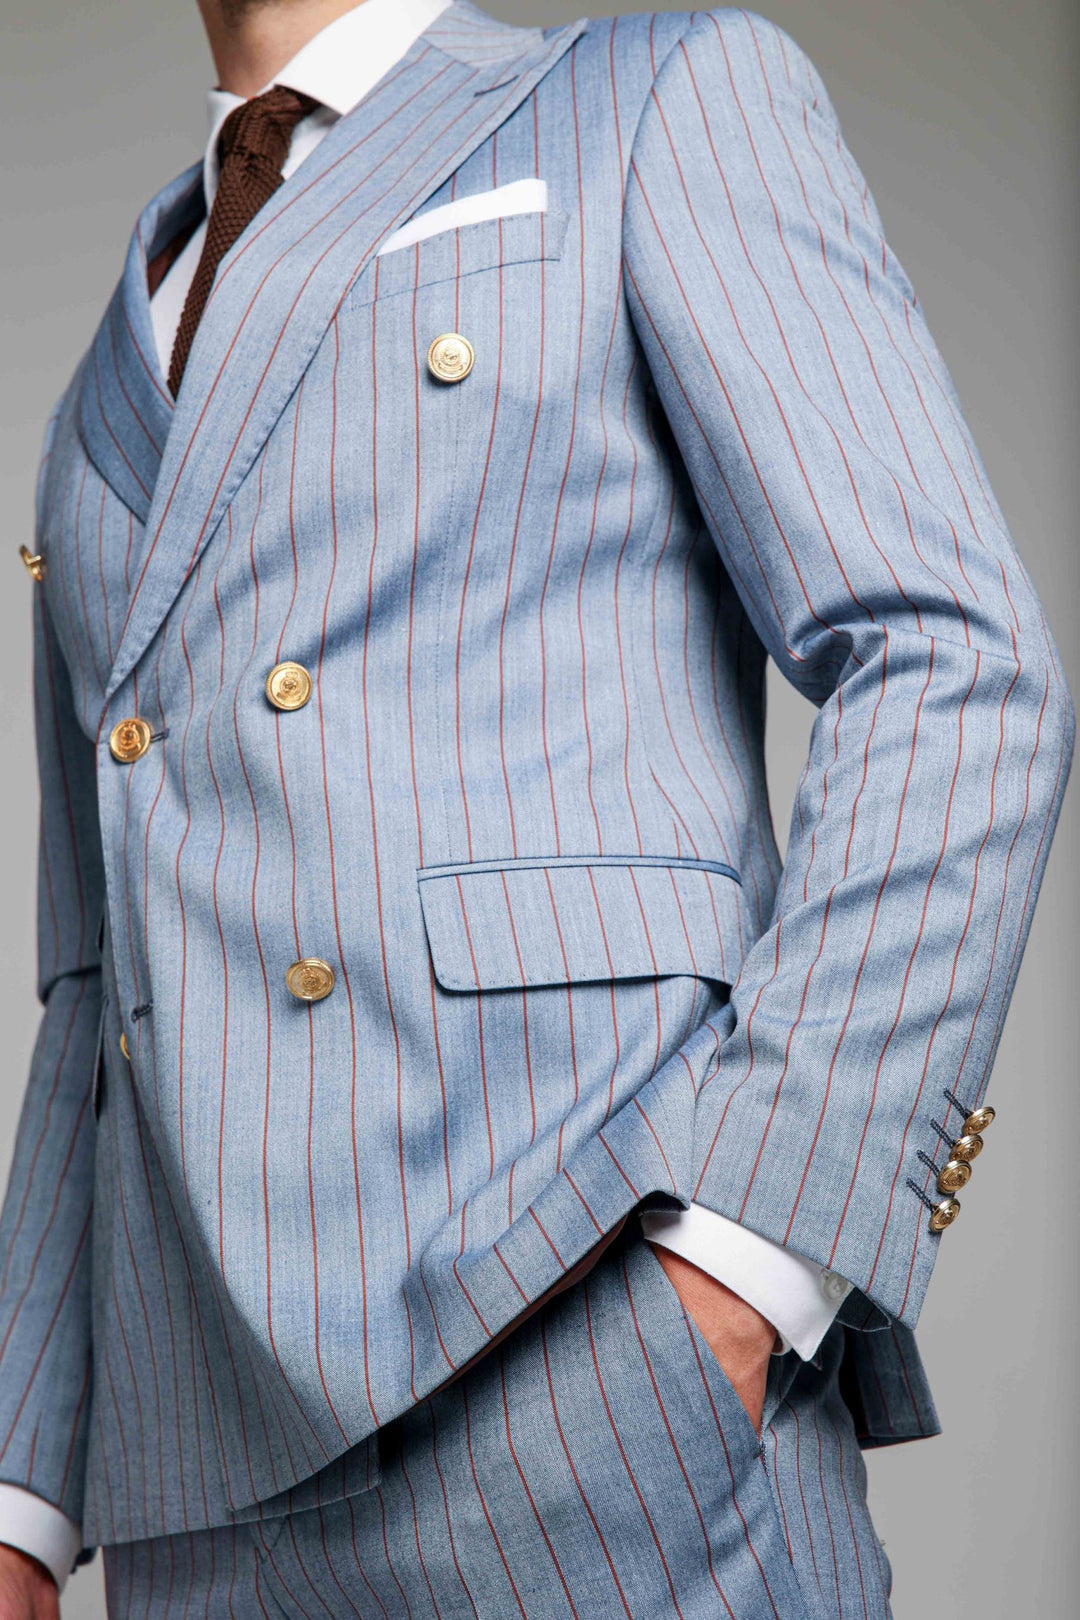 Two-piece light blue suit with stripes and double-breasted jacket